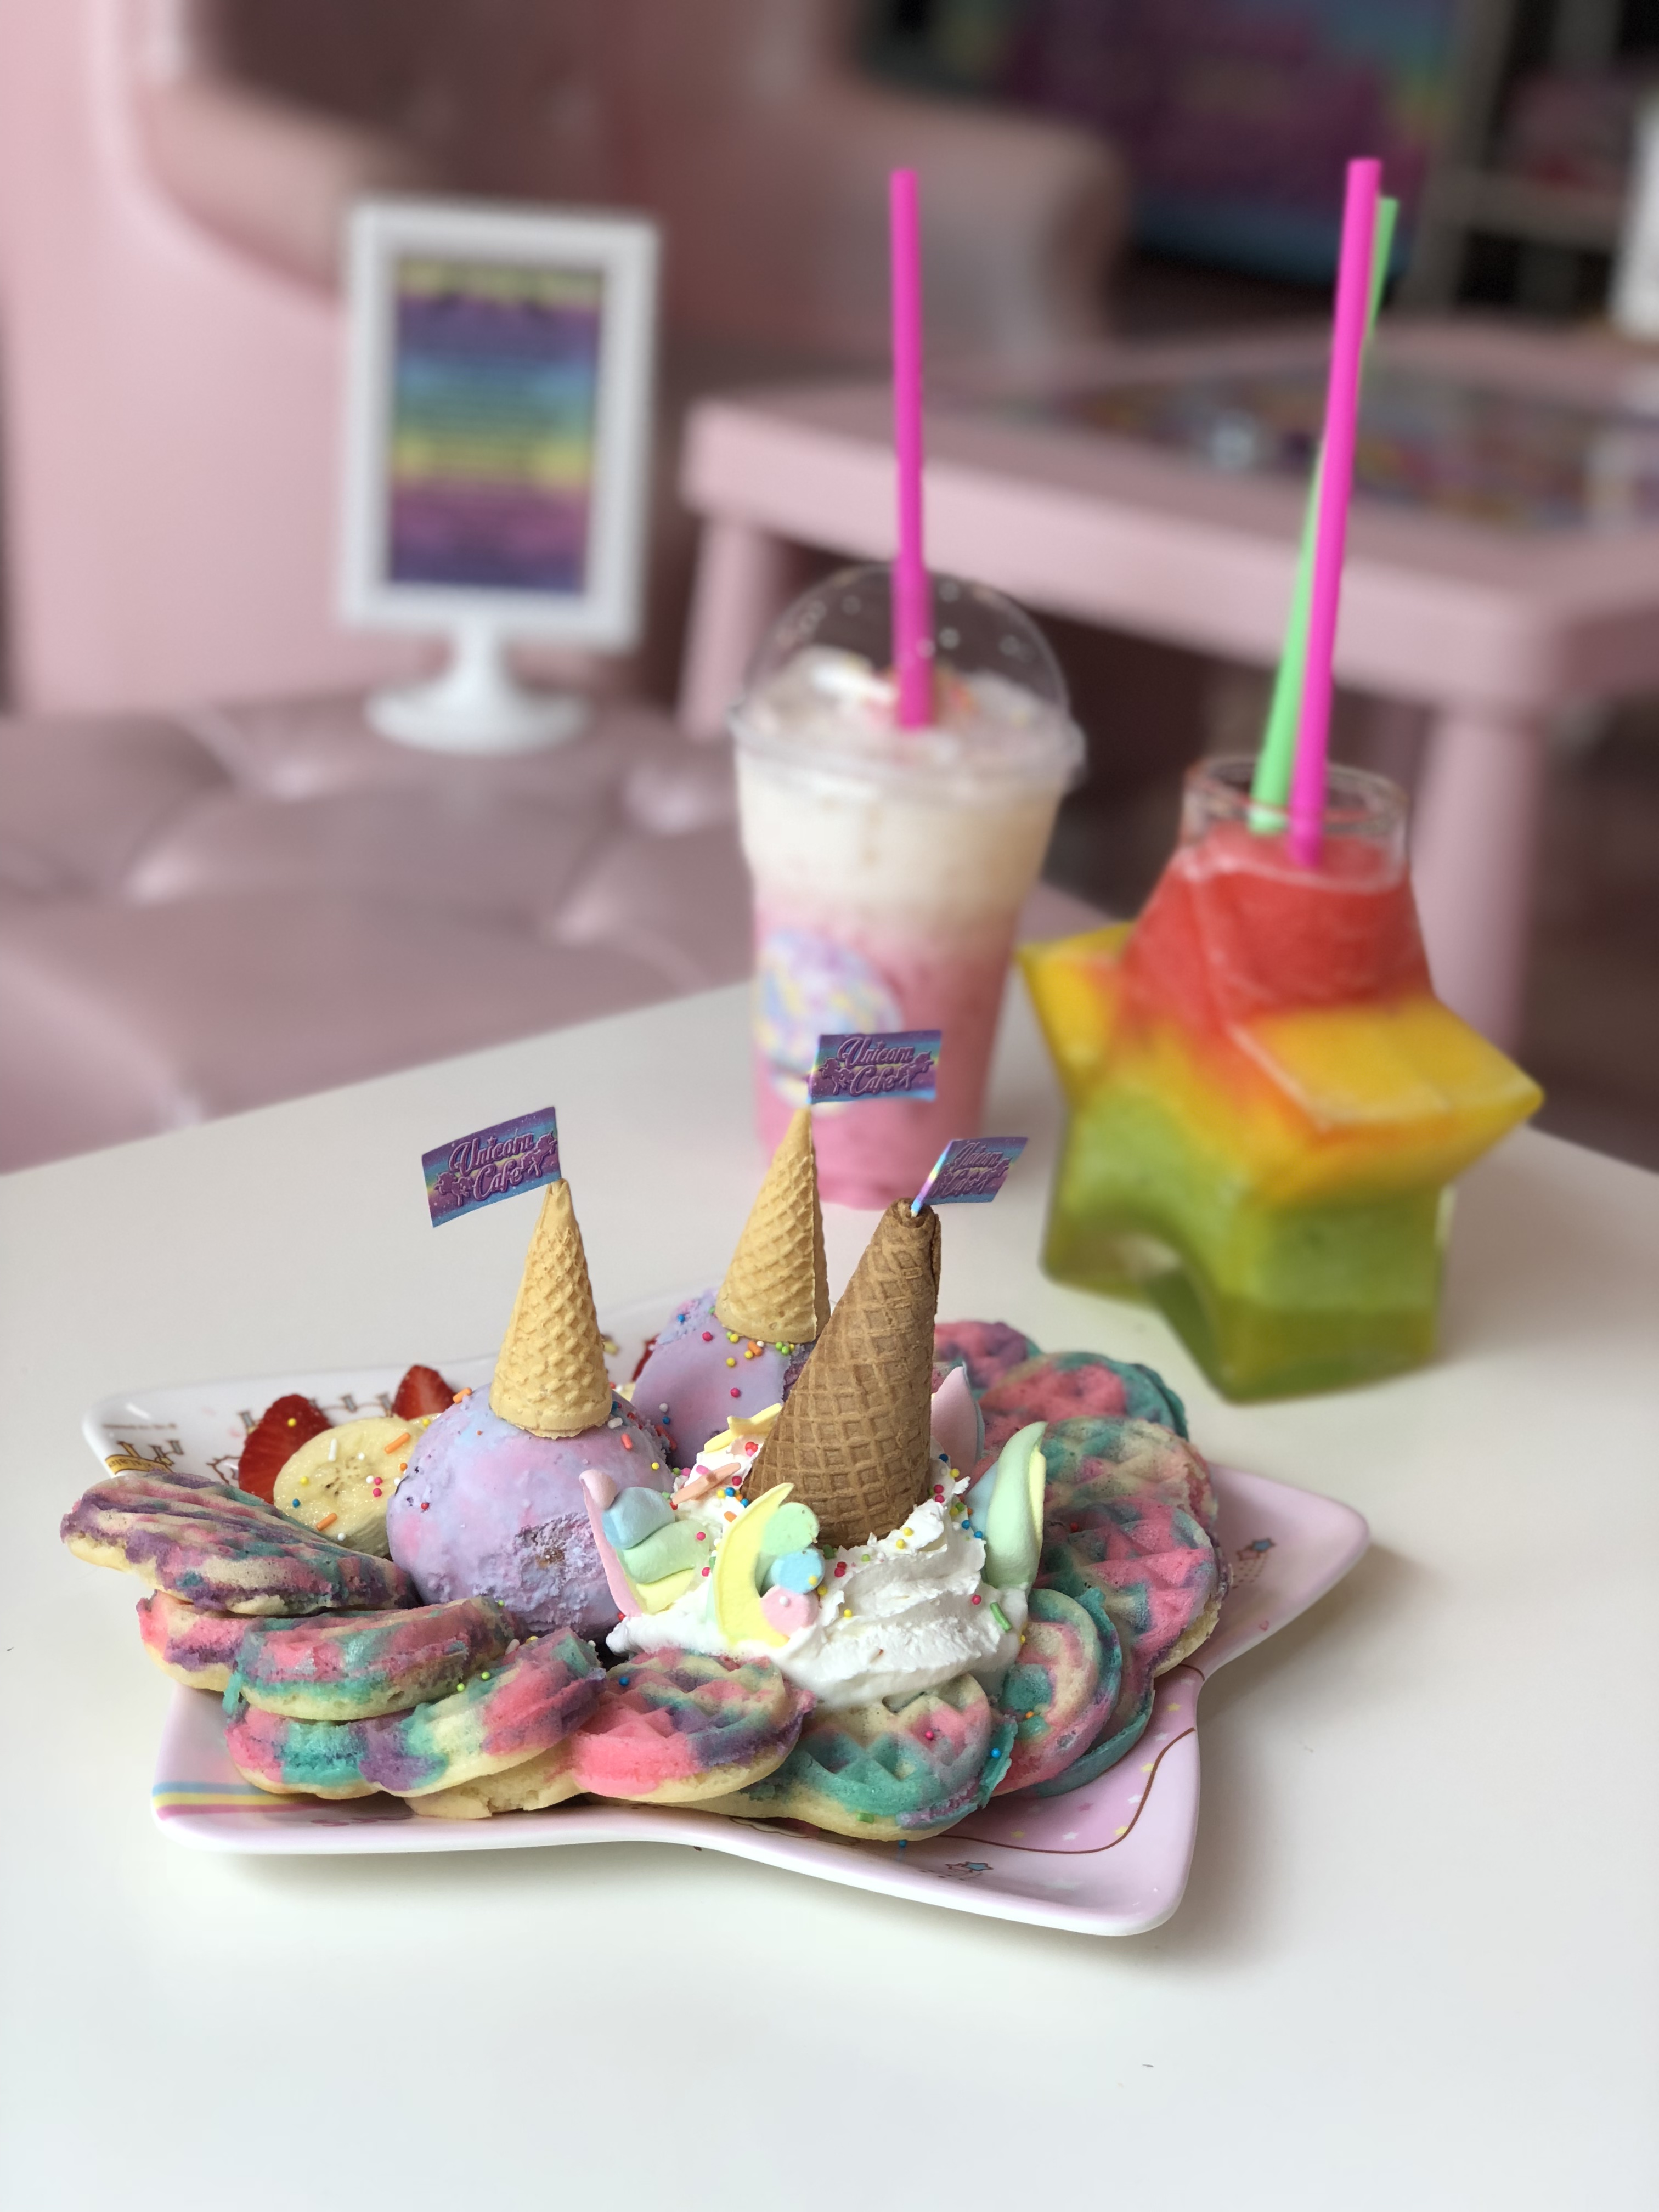 The food in Unicorn cafe